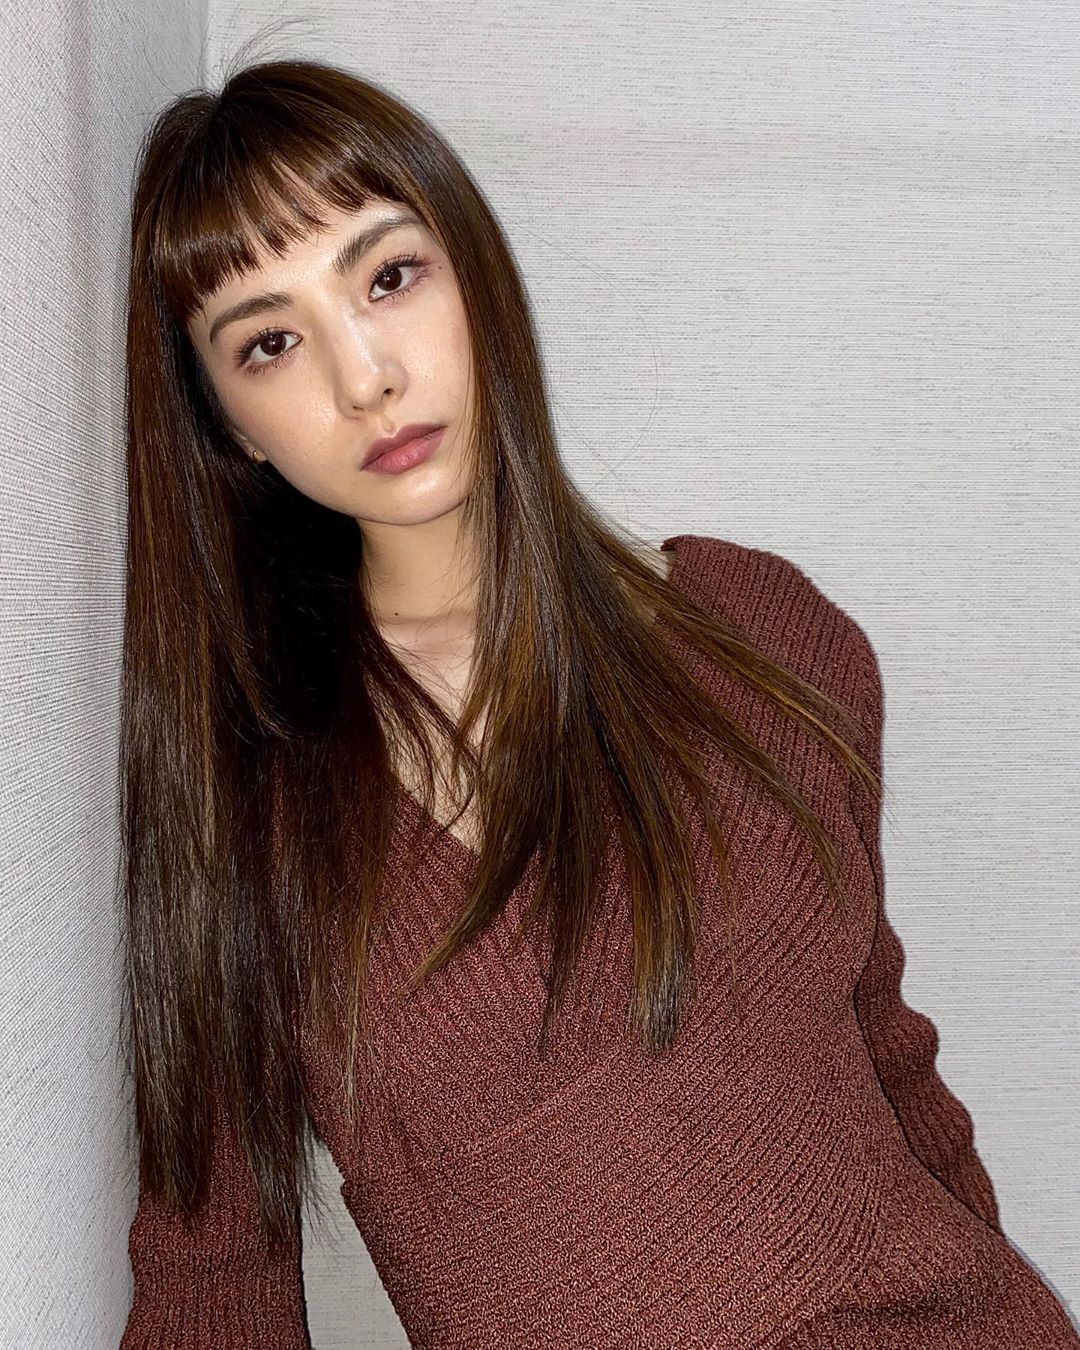 Actor Nana flaunts unrivaled beautiful looksNana posted several photos on her Instagram page on Monday.In the photo, Nana stares at the camera, fully digesting a deeply-finished knit dress, which makes Nanas loveliness stand out.Nana captivated the sights of those who see them with dazzling beautiful looks and various poses.Nana is appearing on KBS 2TV Drama Output Table.Photo: Nana Instagram